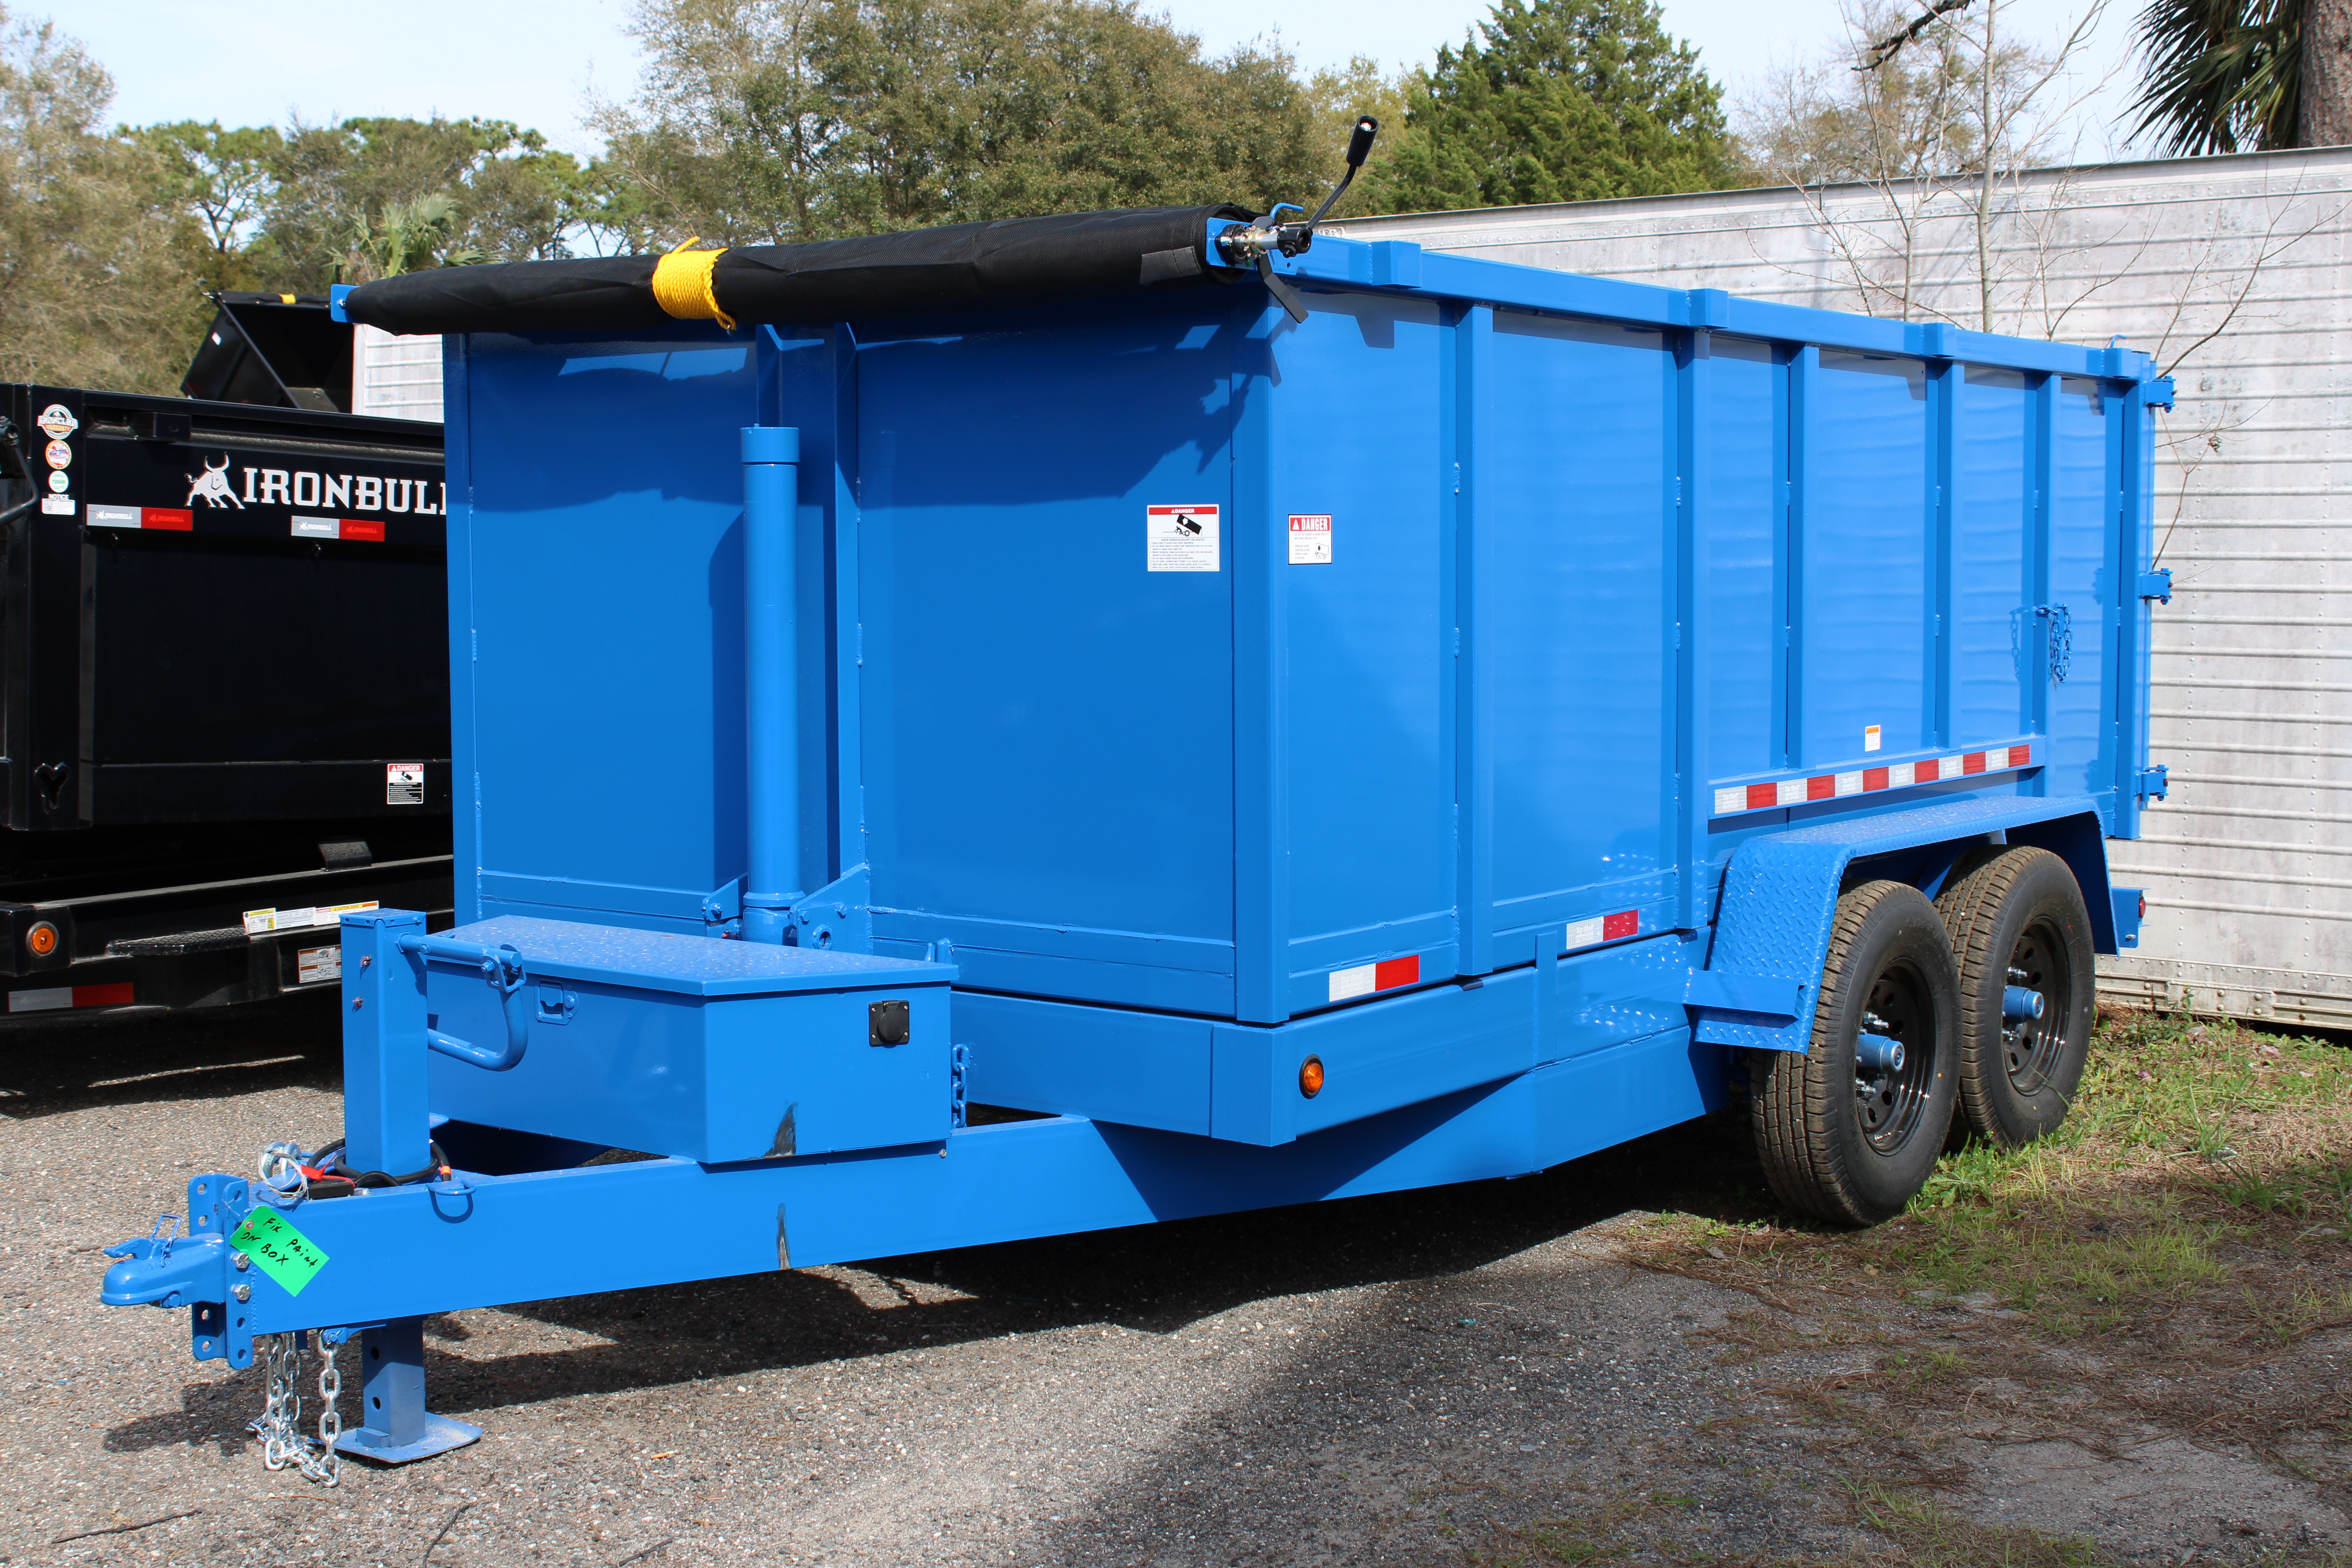 Top 5 Reasons to Choose a Hydraulic Dump Trailer for Your Next Hauling Project The Best Dump Trailers Dump Trailers